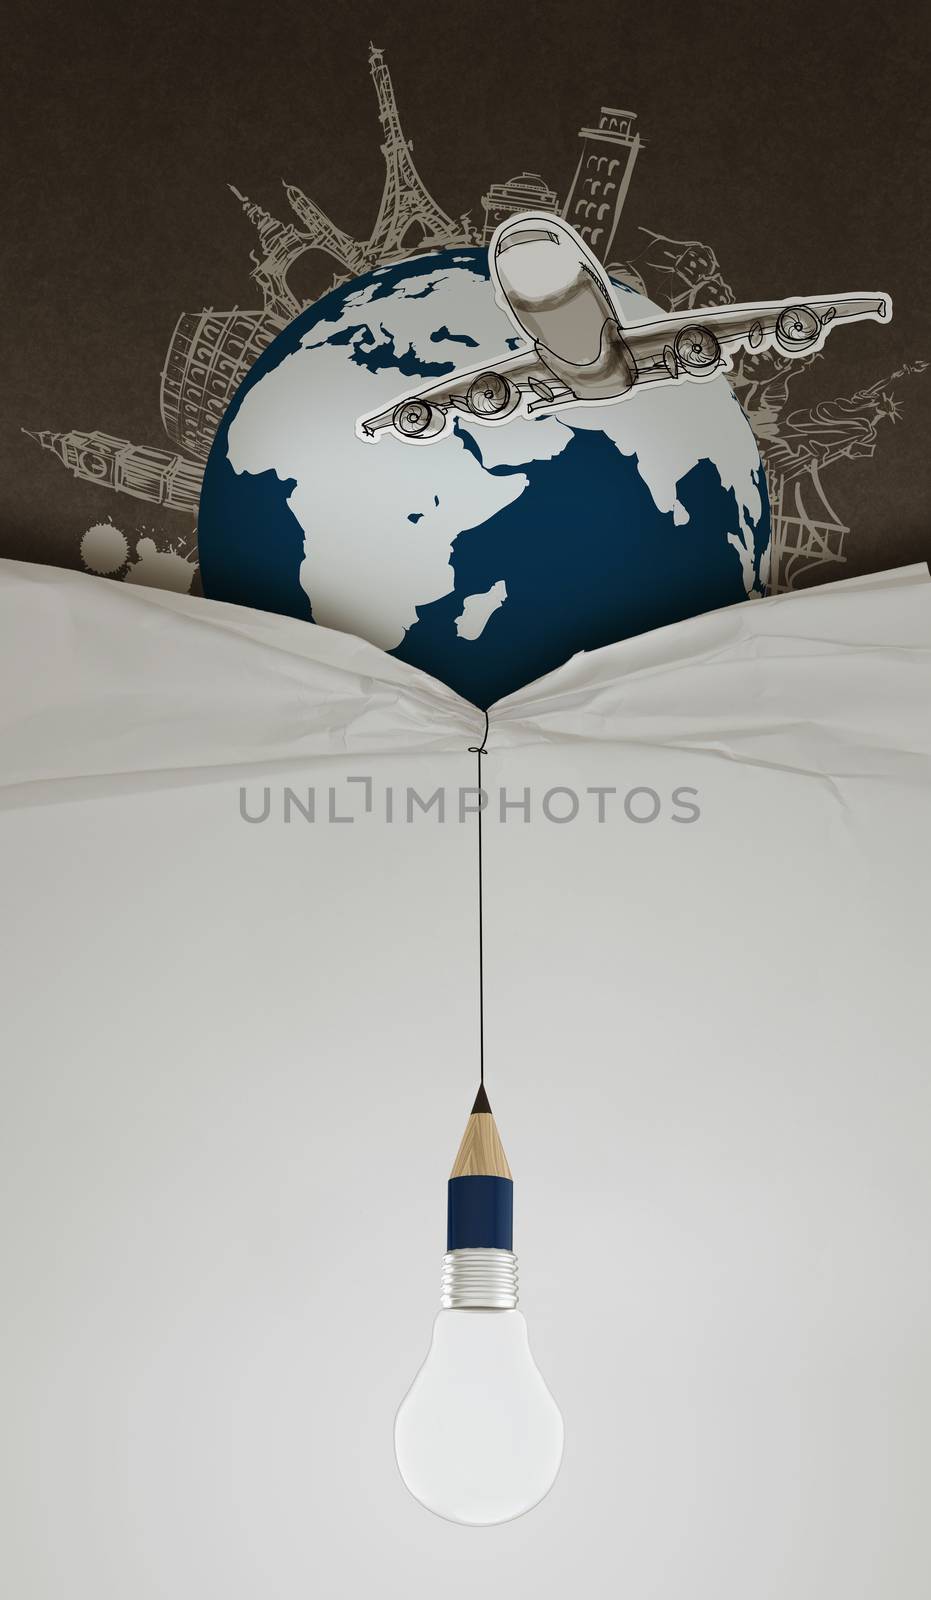 pencil lightbulb draw rope open wrinkled paper show airplane traveling around the world as concept